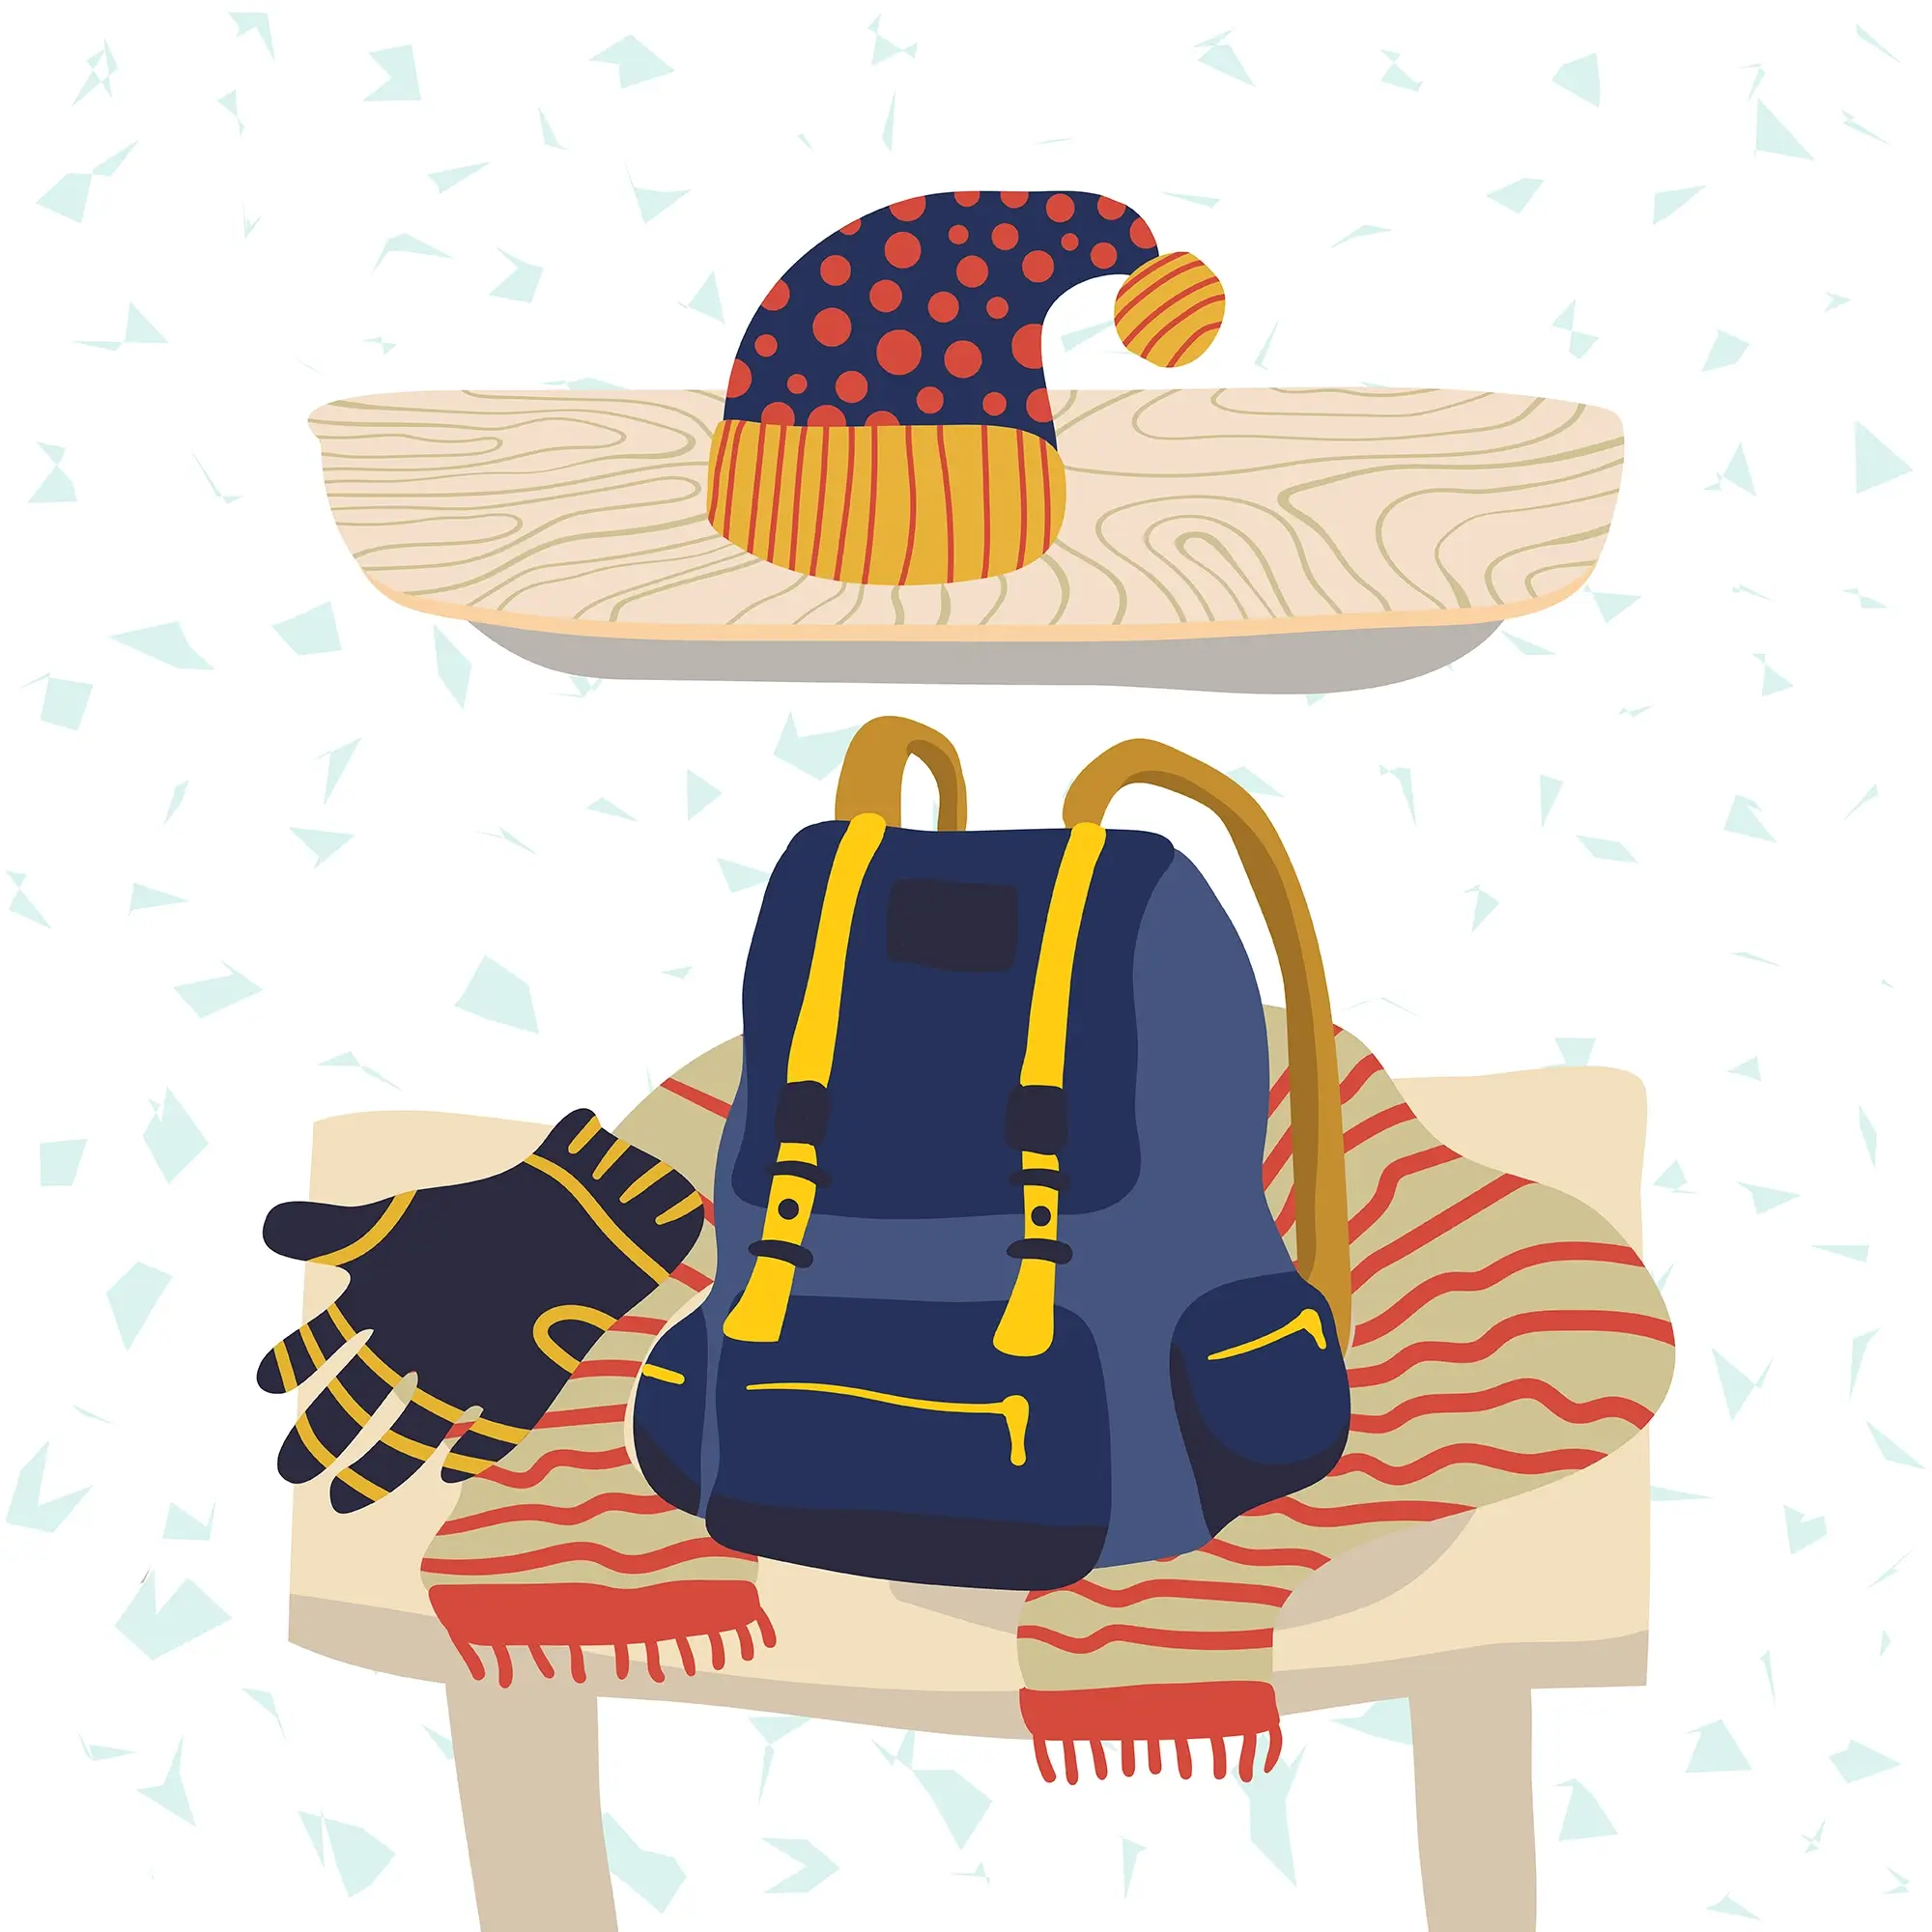 Illustration: A cozy arrangement featuring a winter bag, gloves, scarf, and cap neatly arranged on a shelf. Created by Milena Stanisavljevic. Explore more at miletart.com.